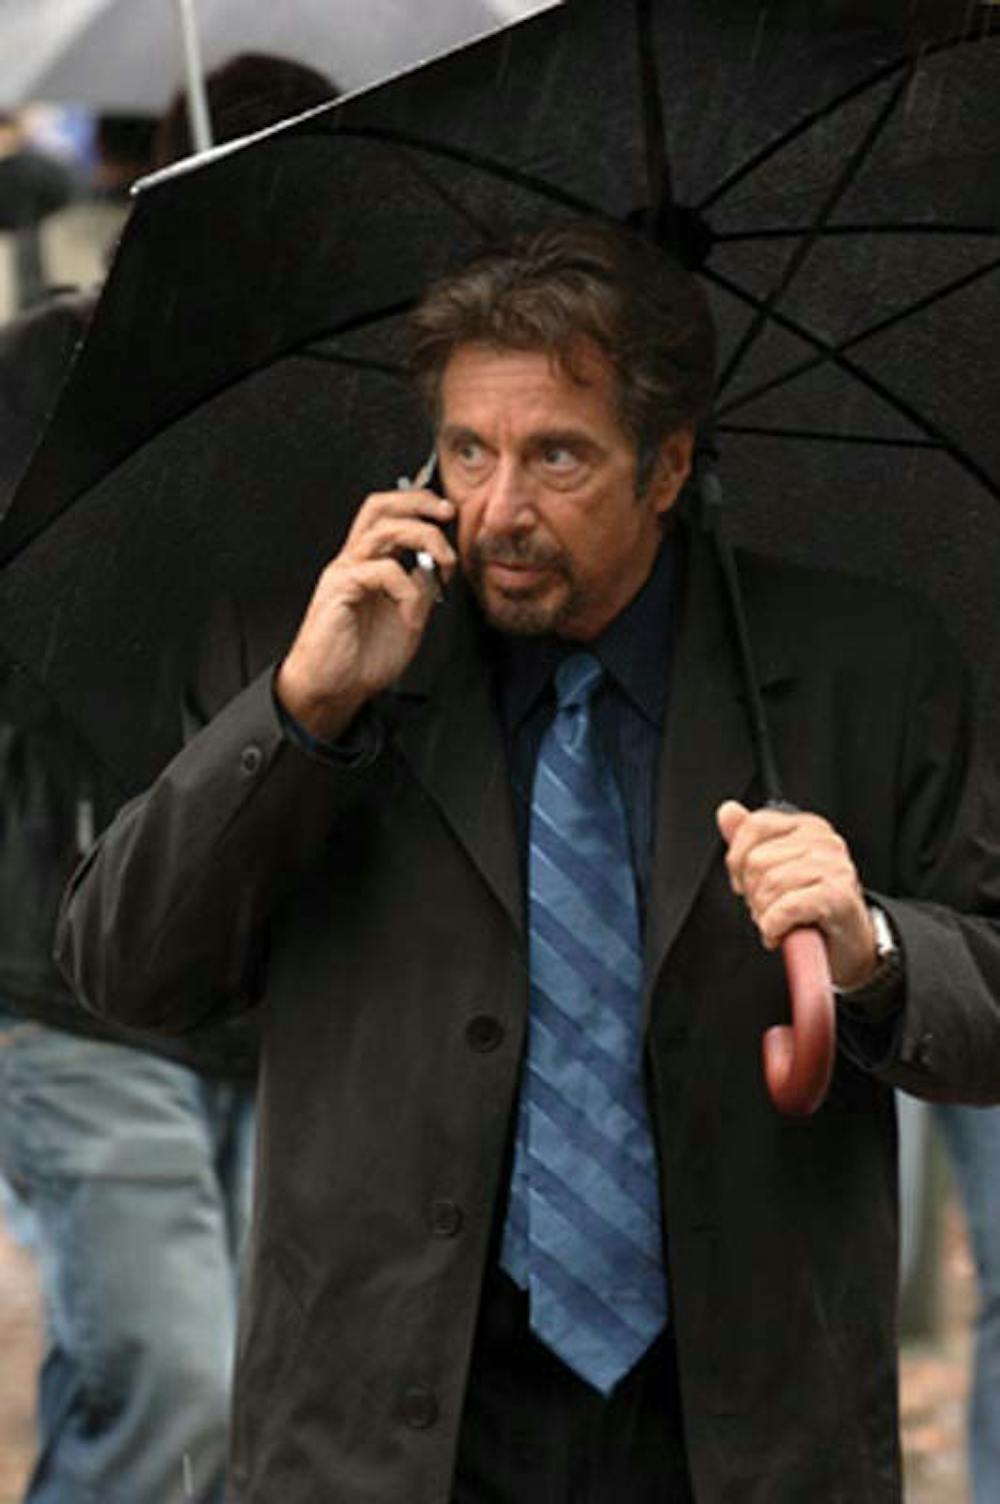 Al Pacino stars in TriStar Pictures' thriller 88 MINUTES.